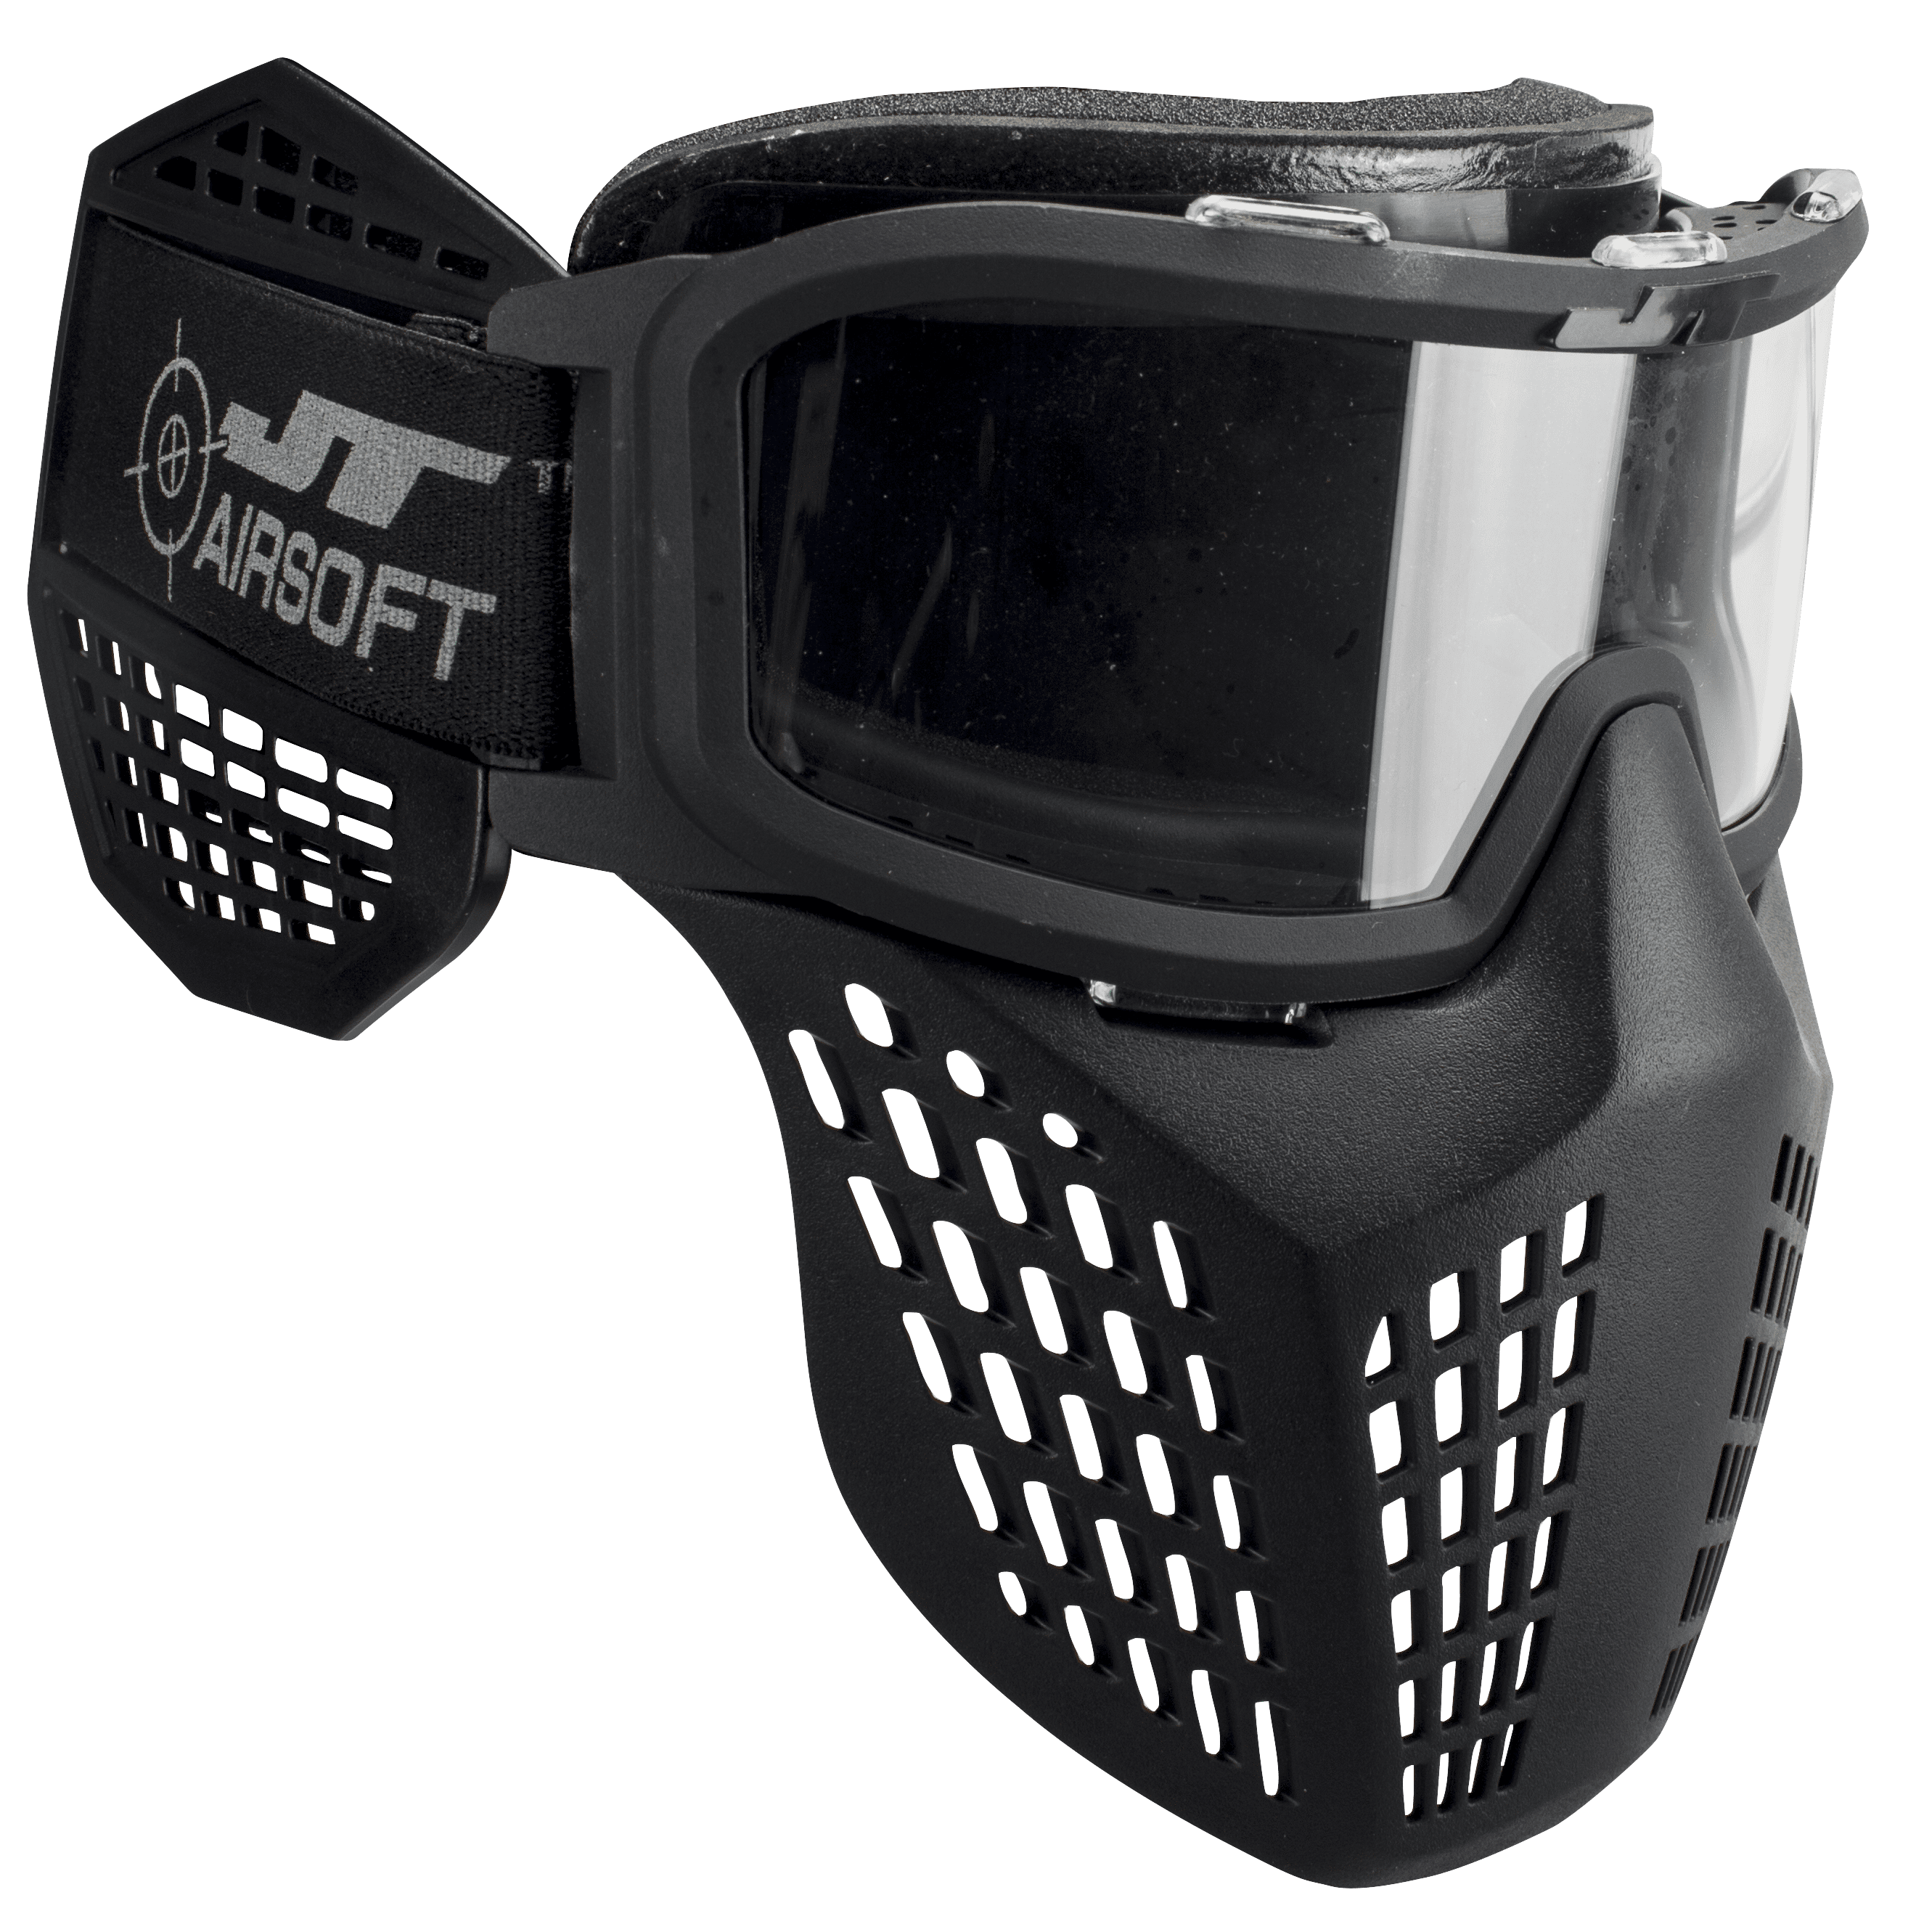 JT Delta 3 Safety Mask for Airsoft, Gel Beads, Blasters and Foam Darts 